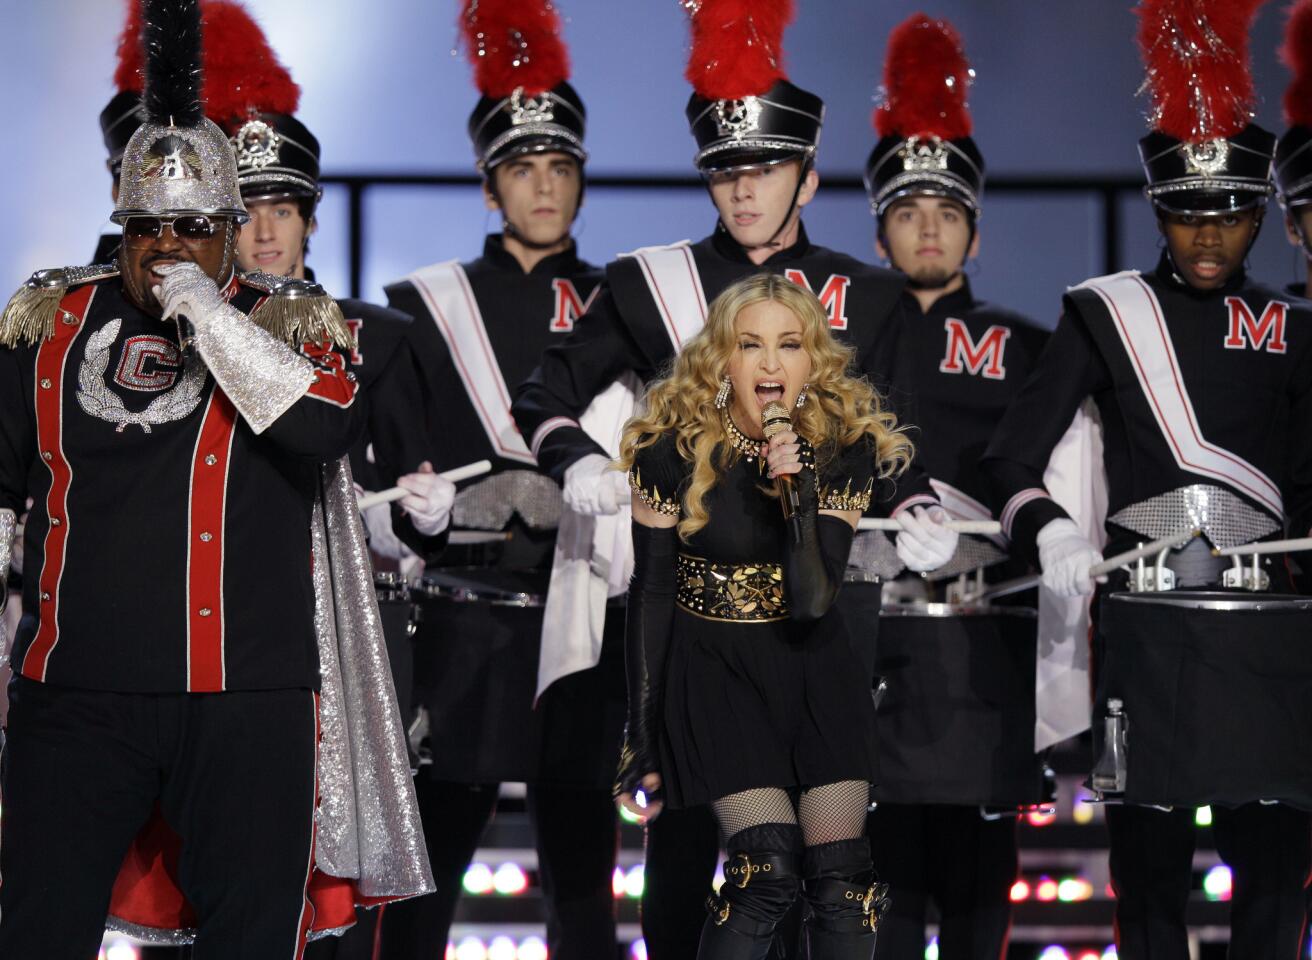 In less than 10 minutes, America watched marching warriors pulling a massive chariot; faux trumpeters announcing the arrival of Madonna; LMFAO, Nicki Minaj, M.I.A. and Cee Lo Green make cameos; several drum lines. Touchdown! Madonna kept 114 million viewers glued to their seats.